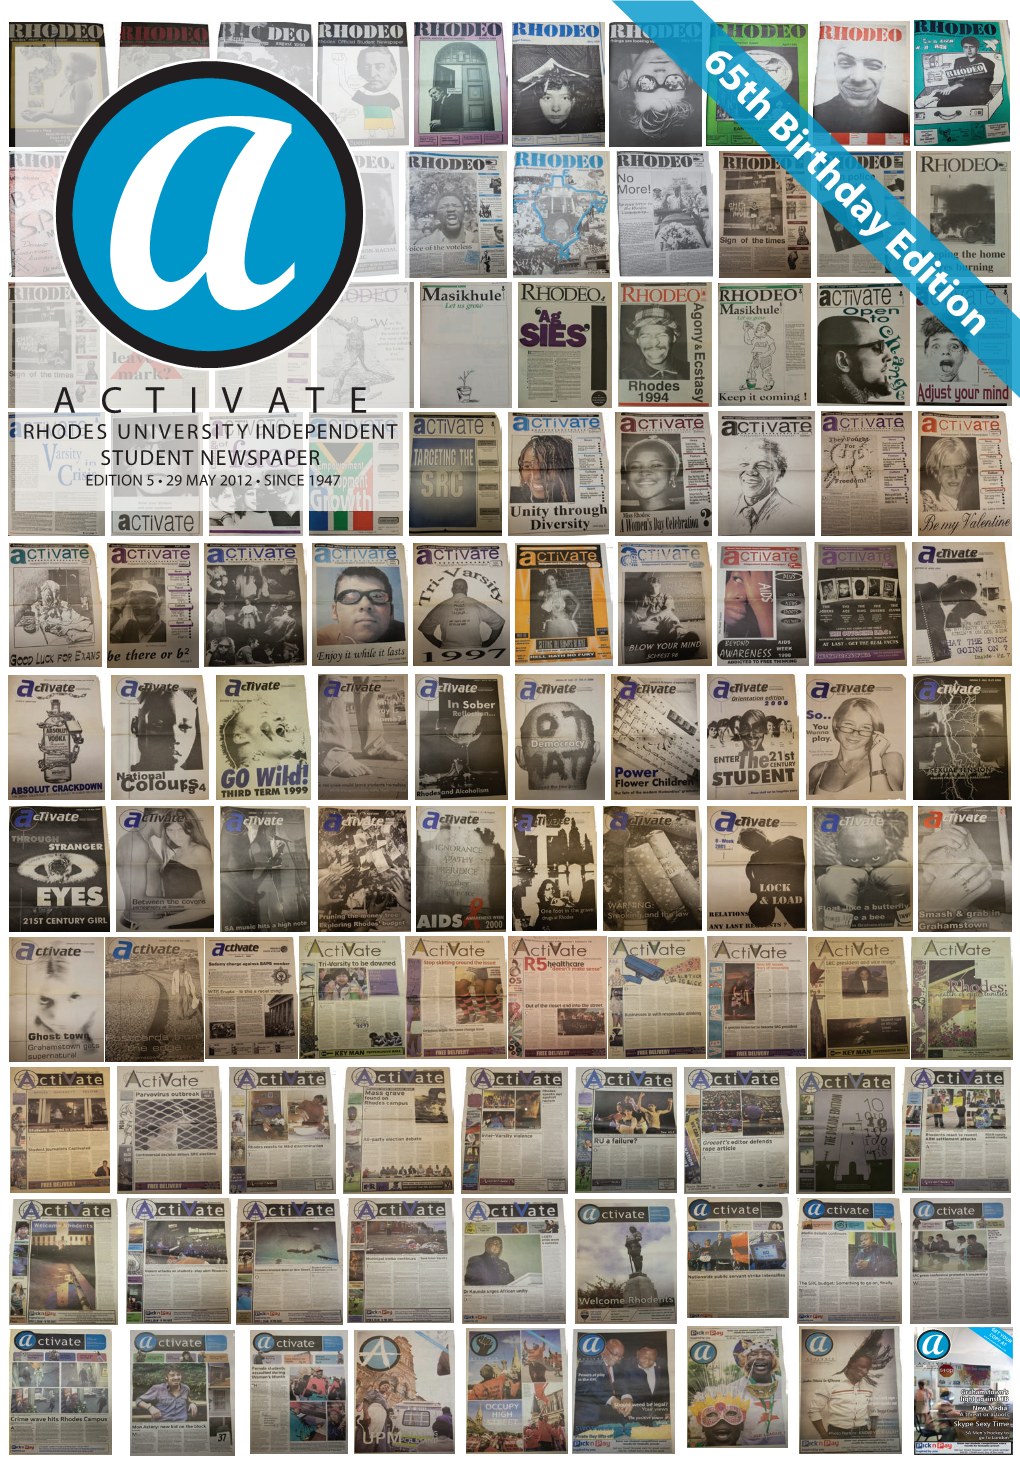 65Th Birthday Edition a a C T I V a T E RHODES UNIVERSITY INDEPENDENT STUDENT NEWSPAPER EDITION 5 • 29 MAY 2012 • SINCE 1947